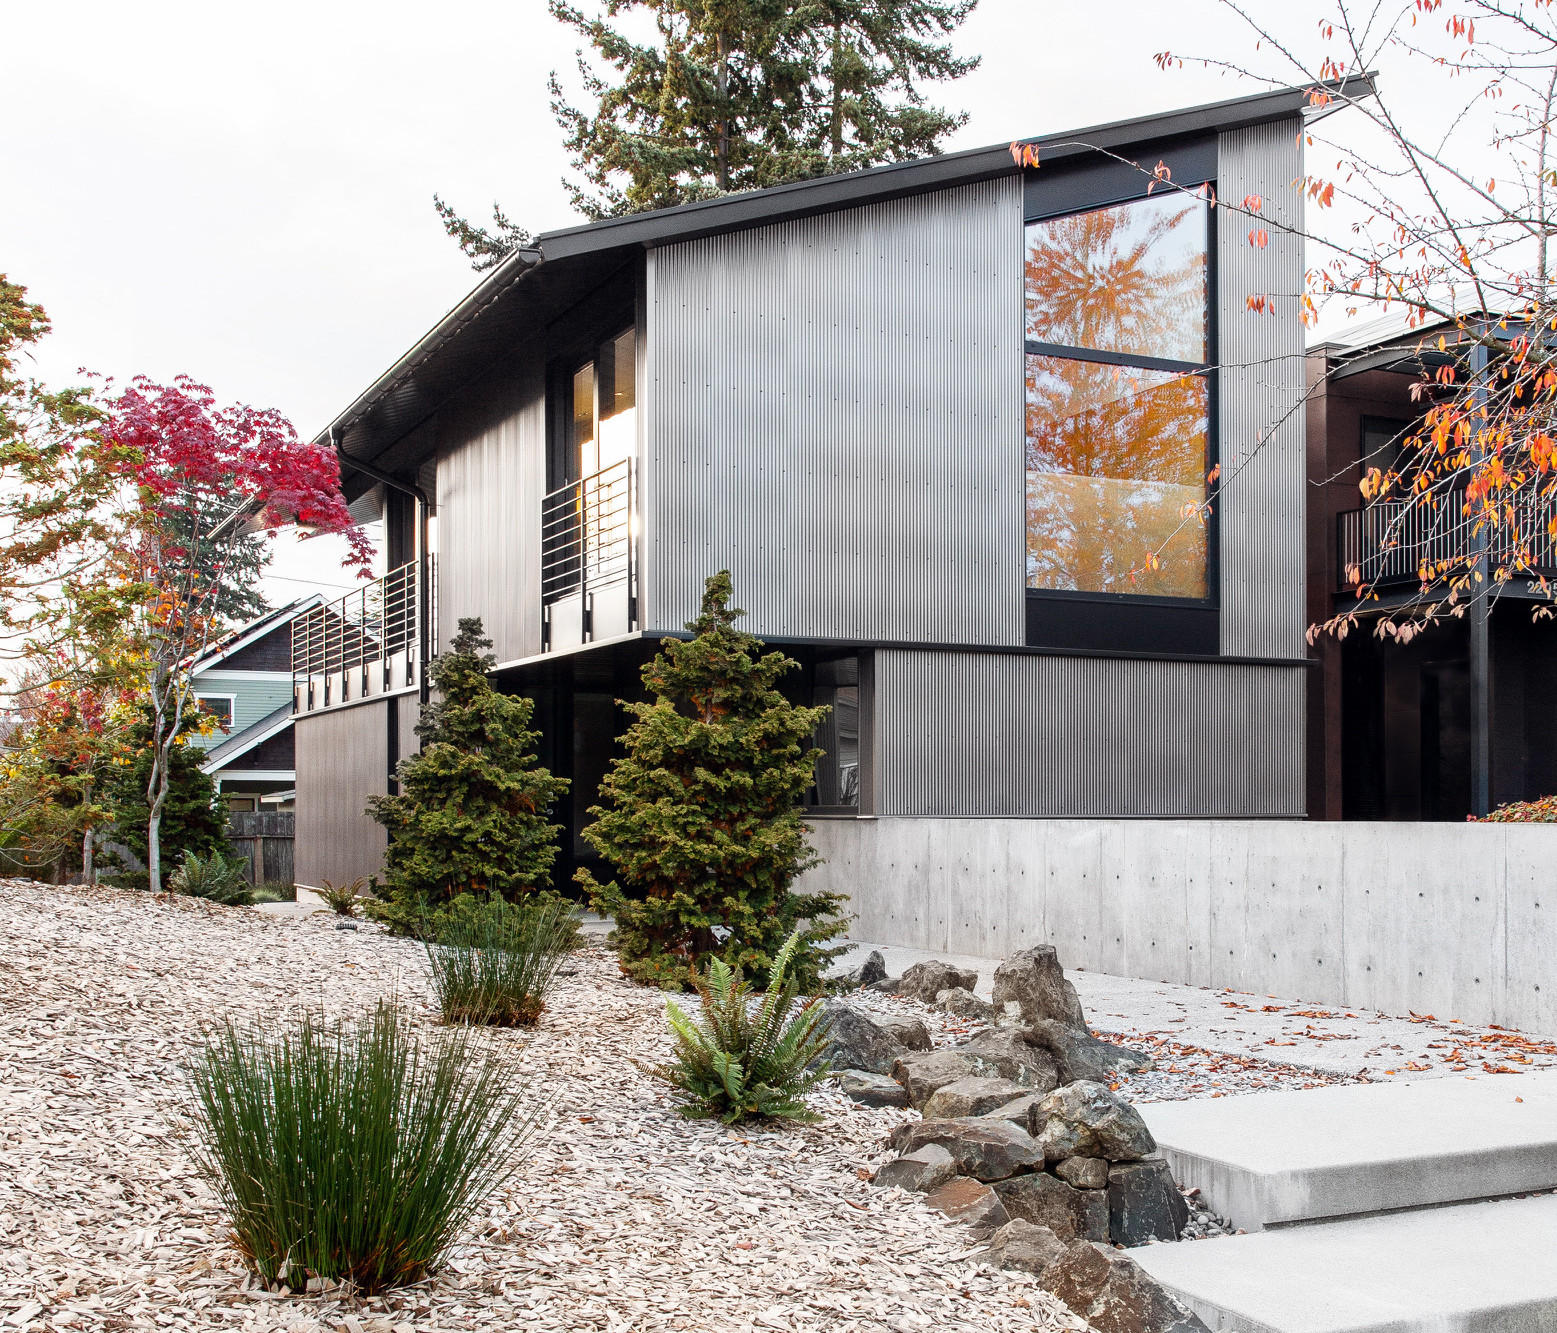 A slanted steel-clad home